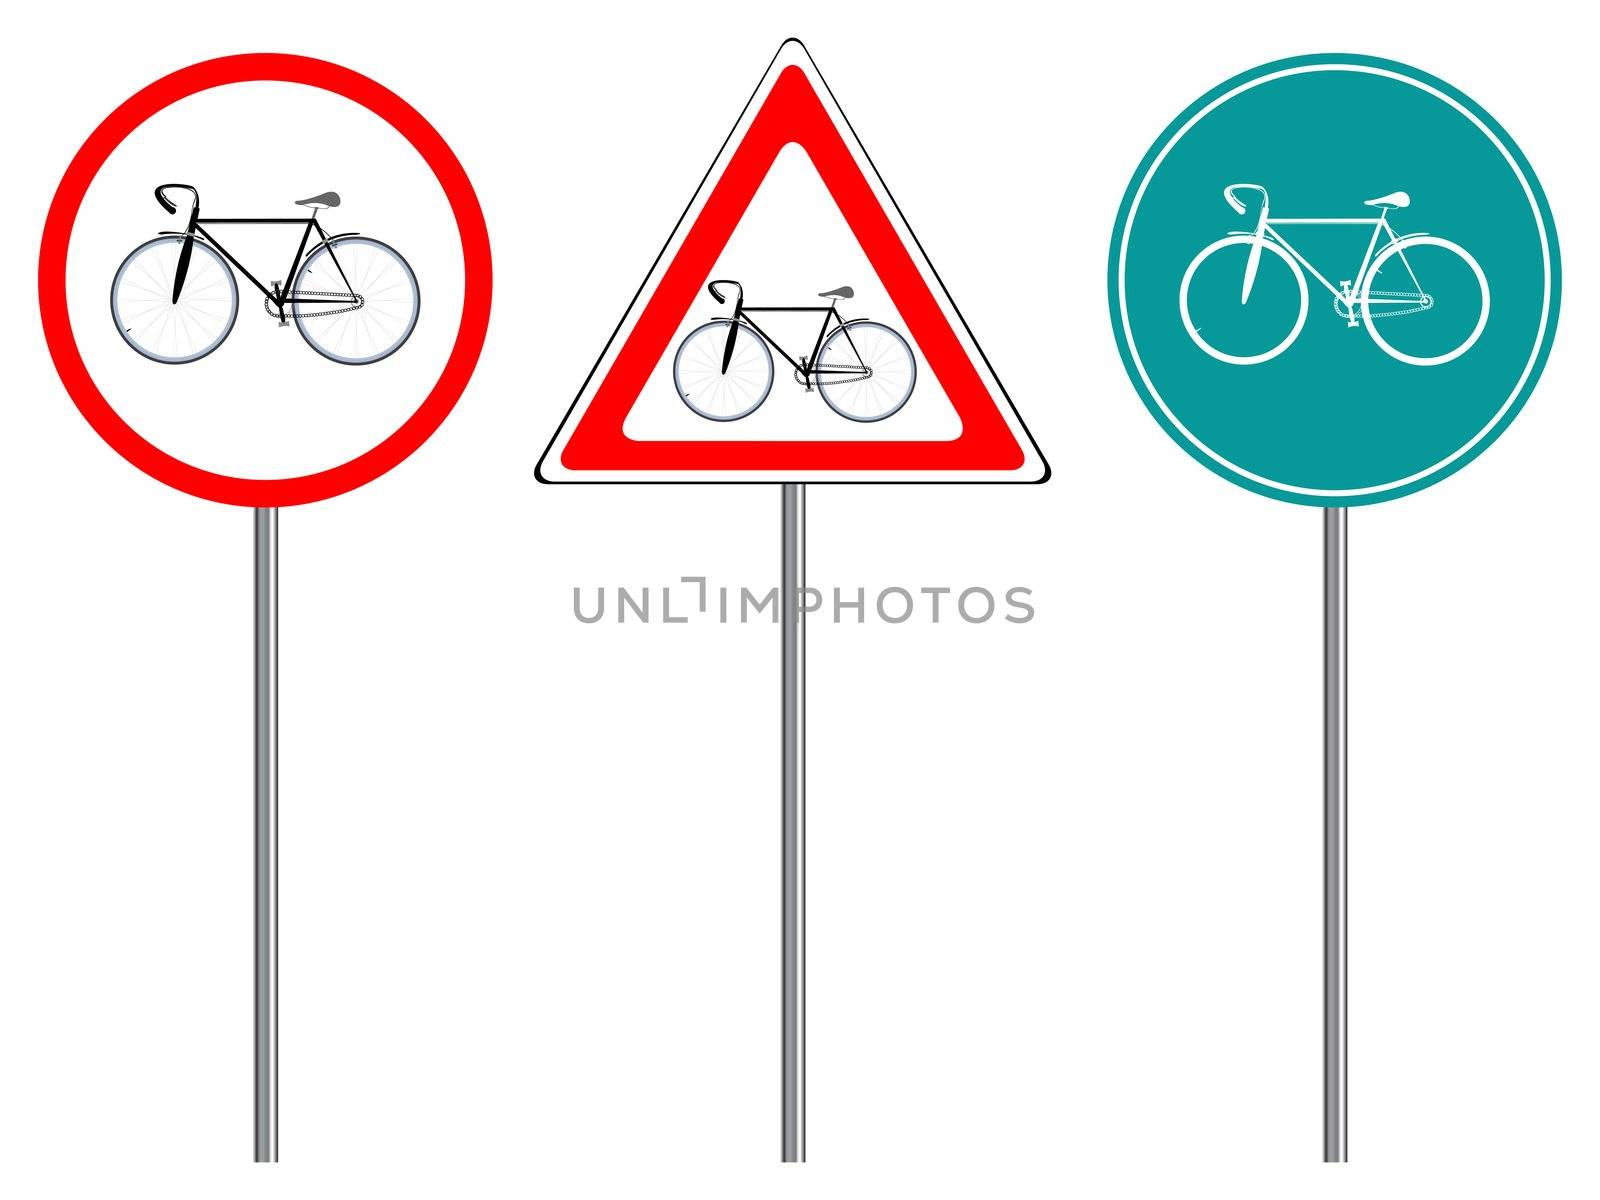 bike traffic signs against white background, abstract vector art illustration